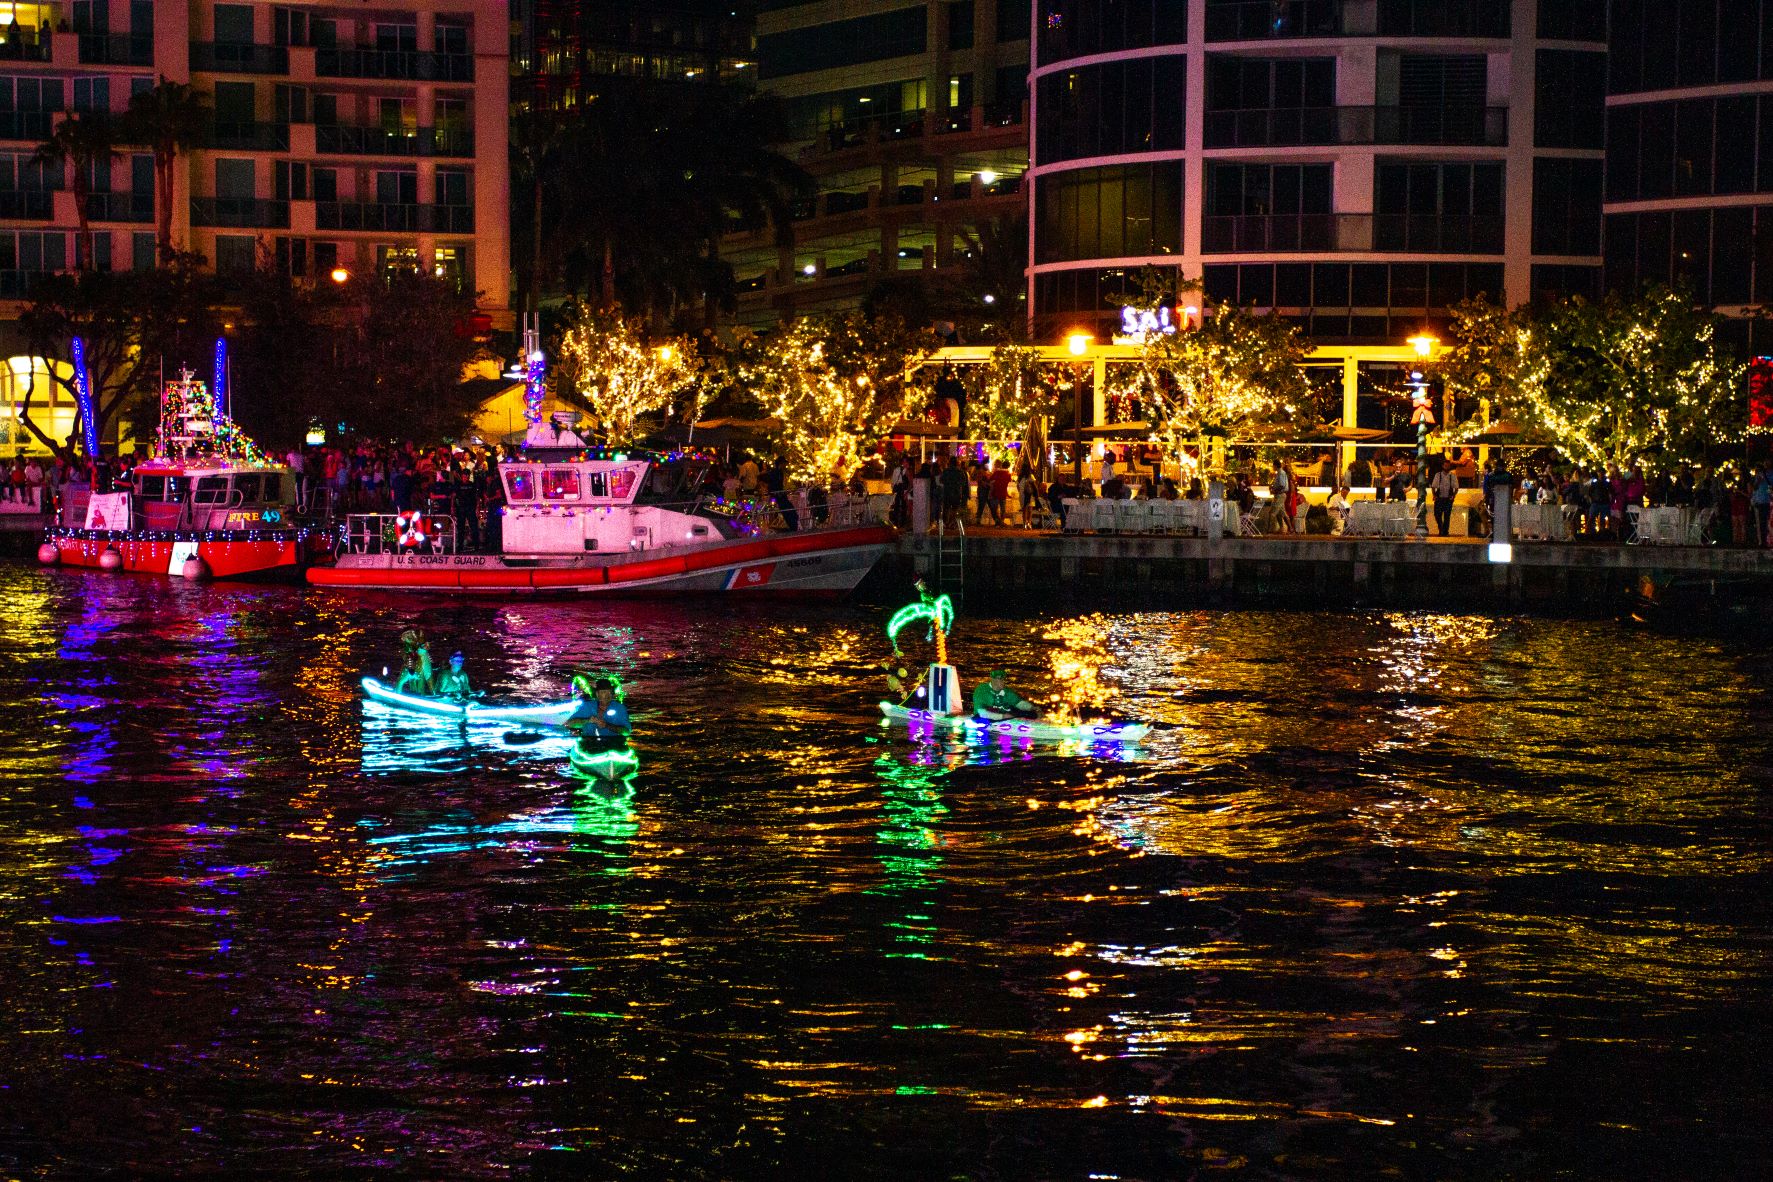 South Florida Kayaking Meetup, entry H in the 2021 Winterfest Boat Parade